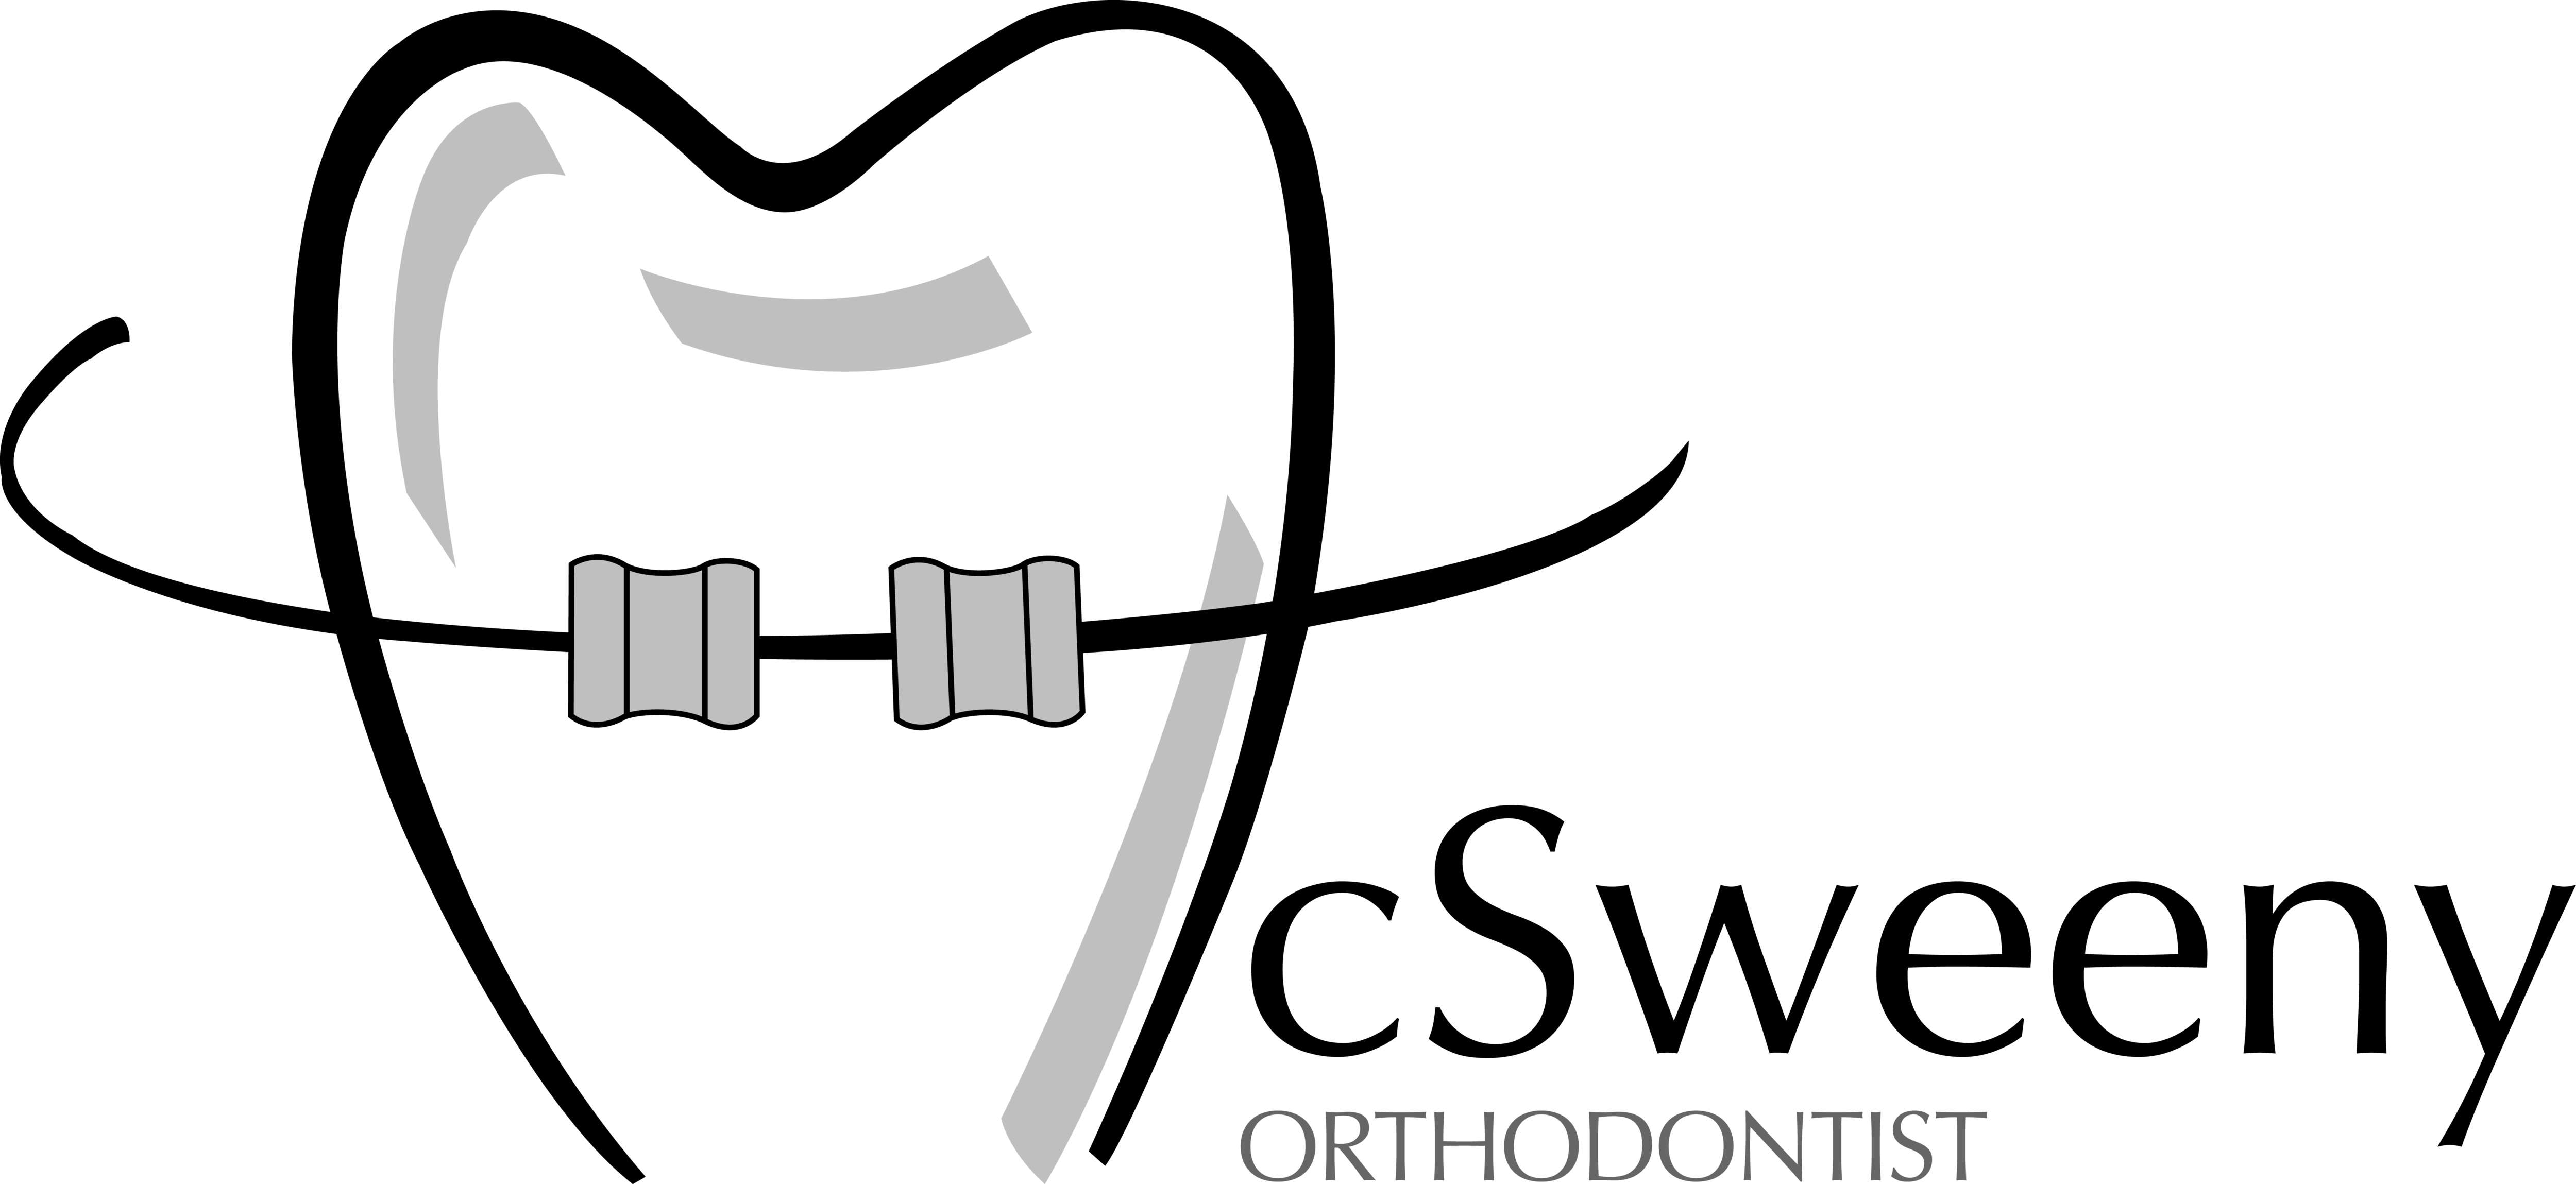 Dr. Kevin McSweeny Orthodontist